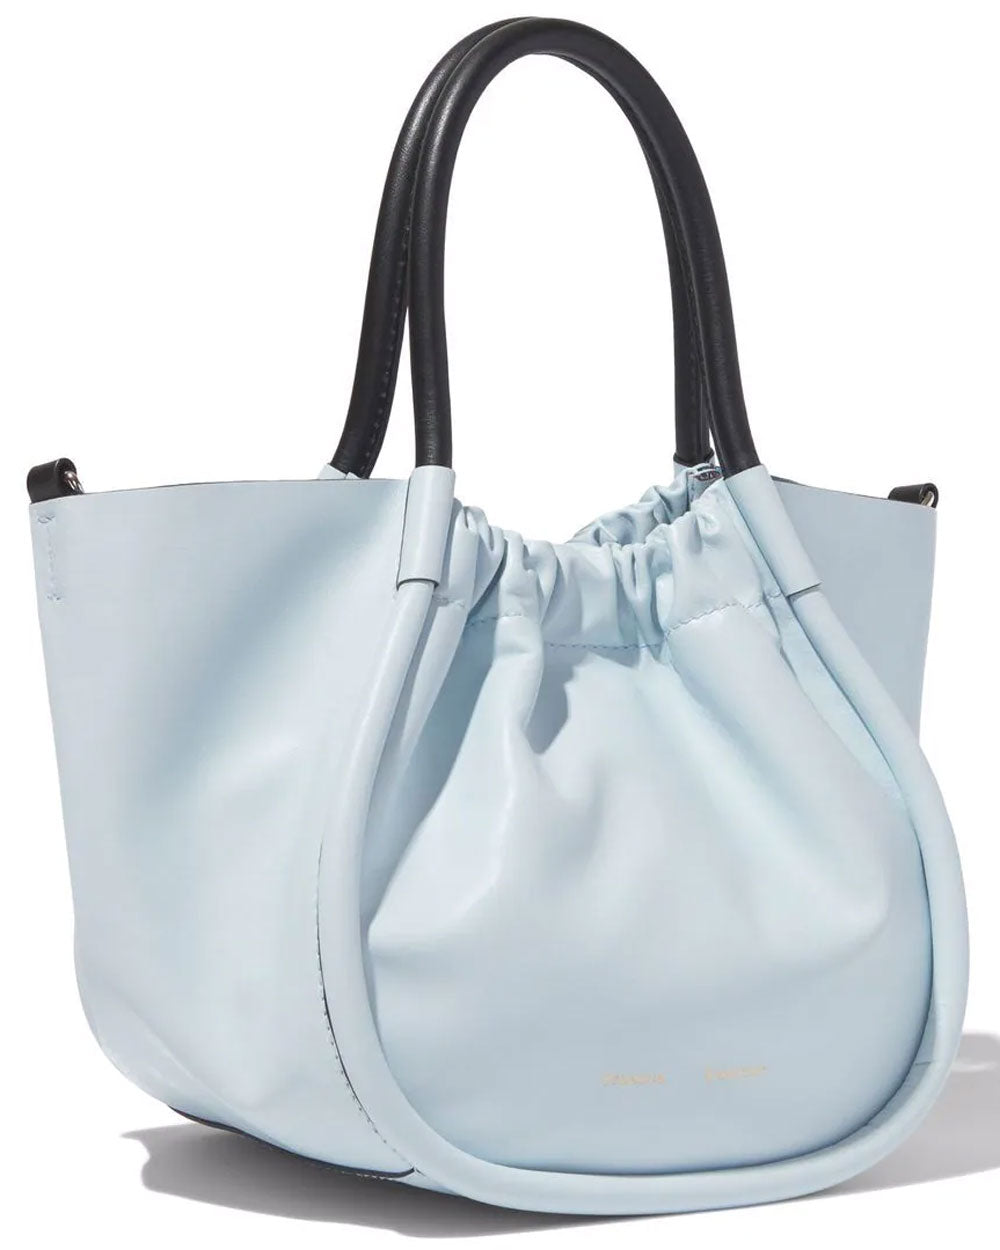 Small Ruched Tote Bag in Pale Blue